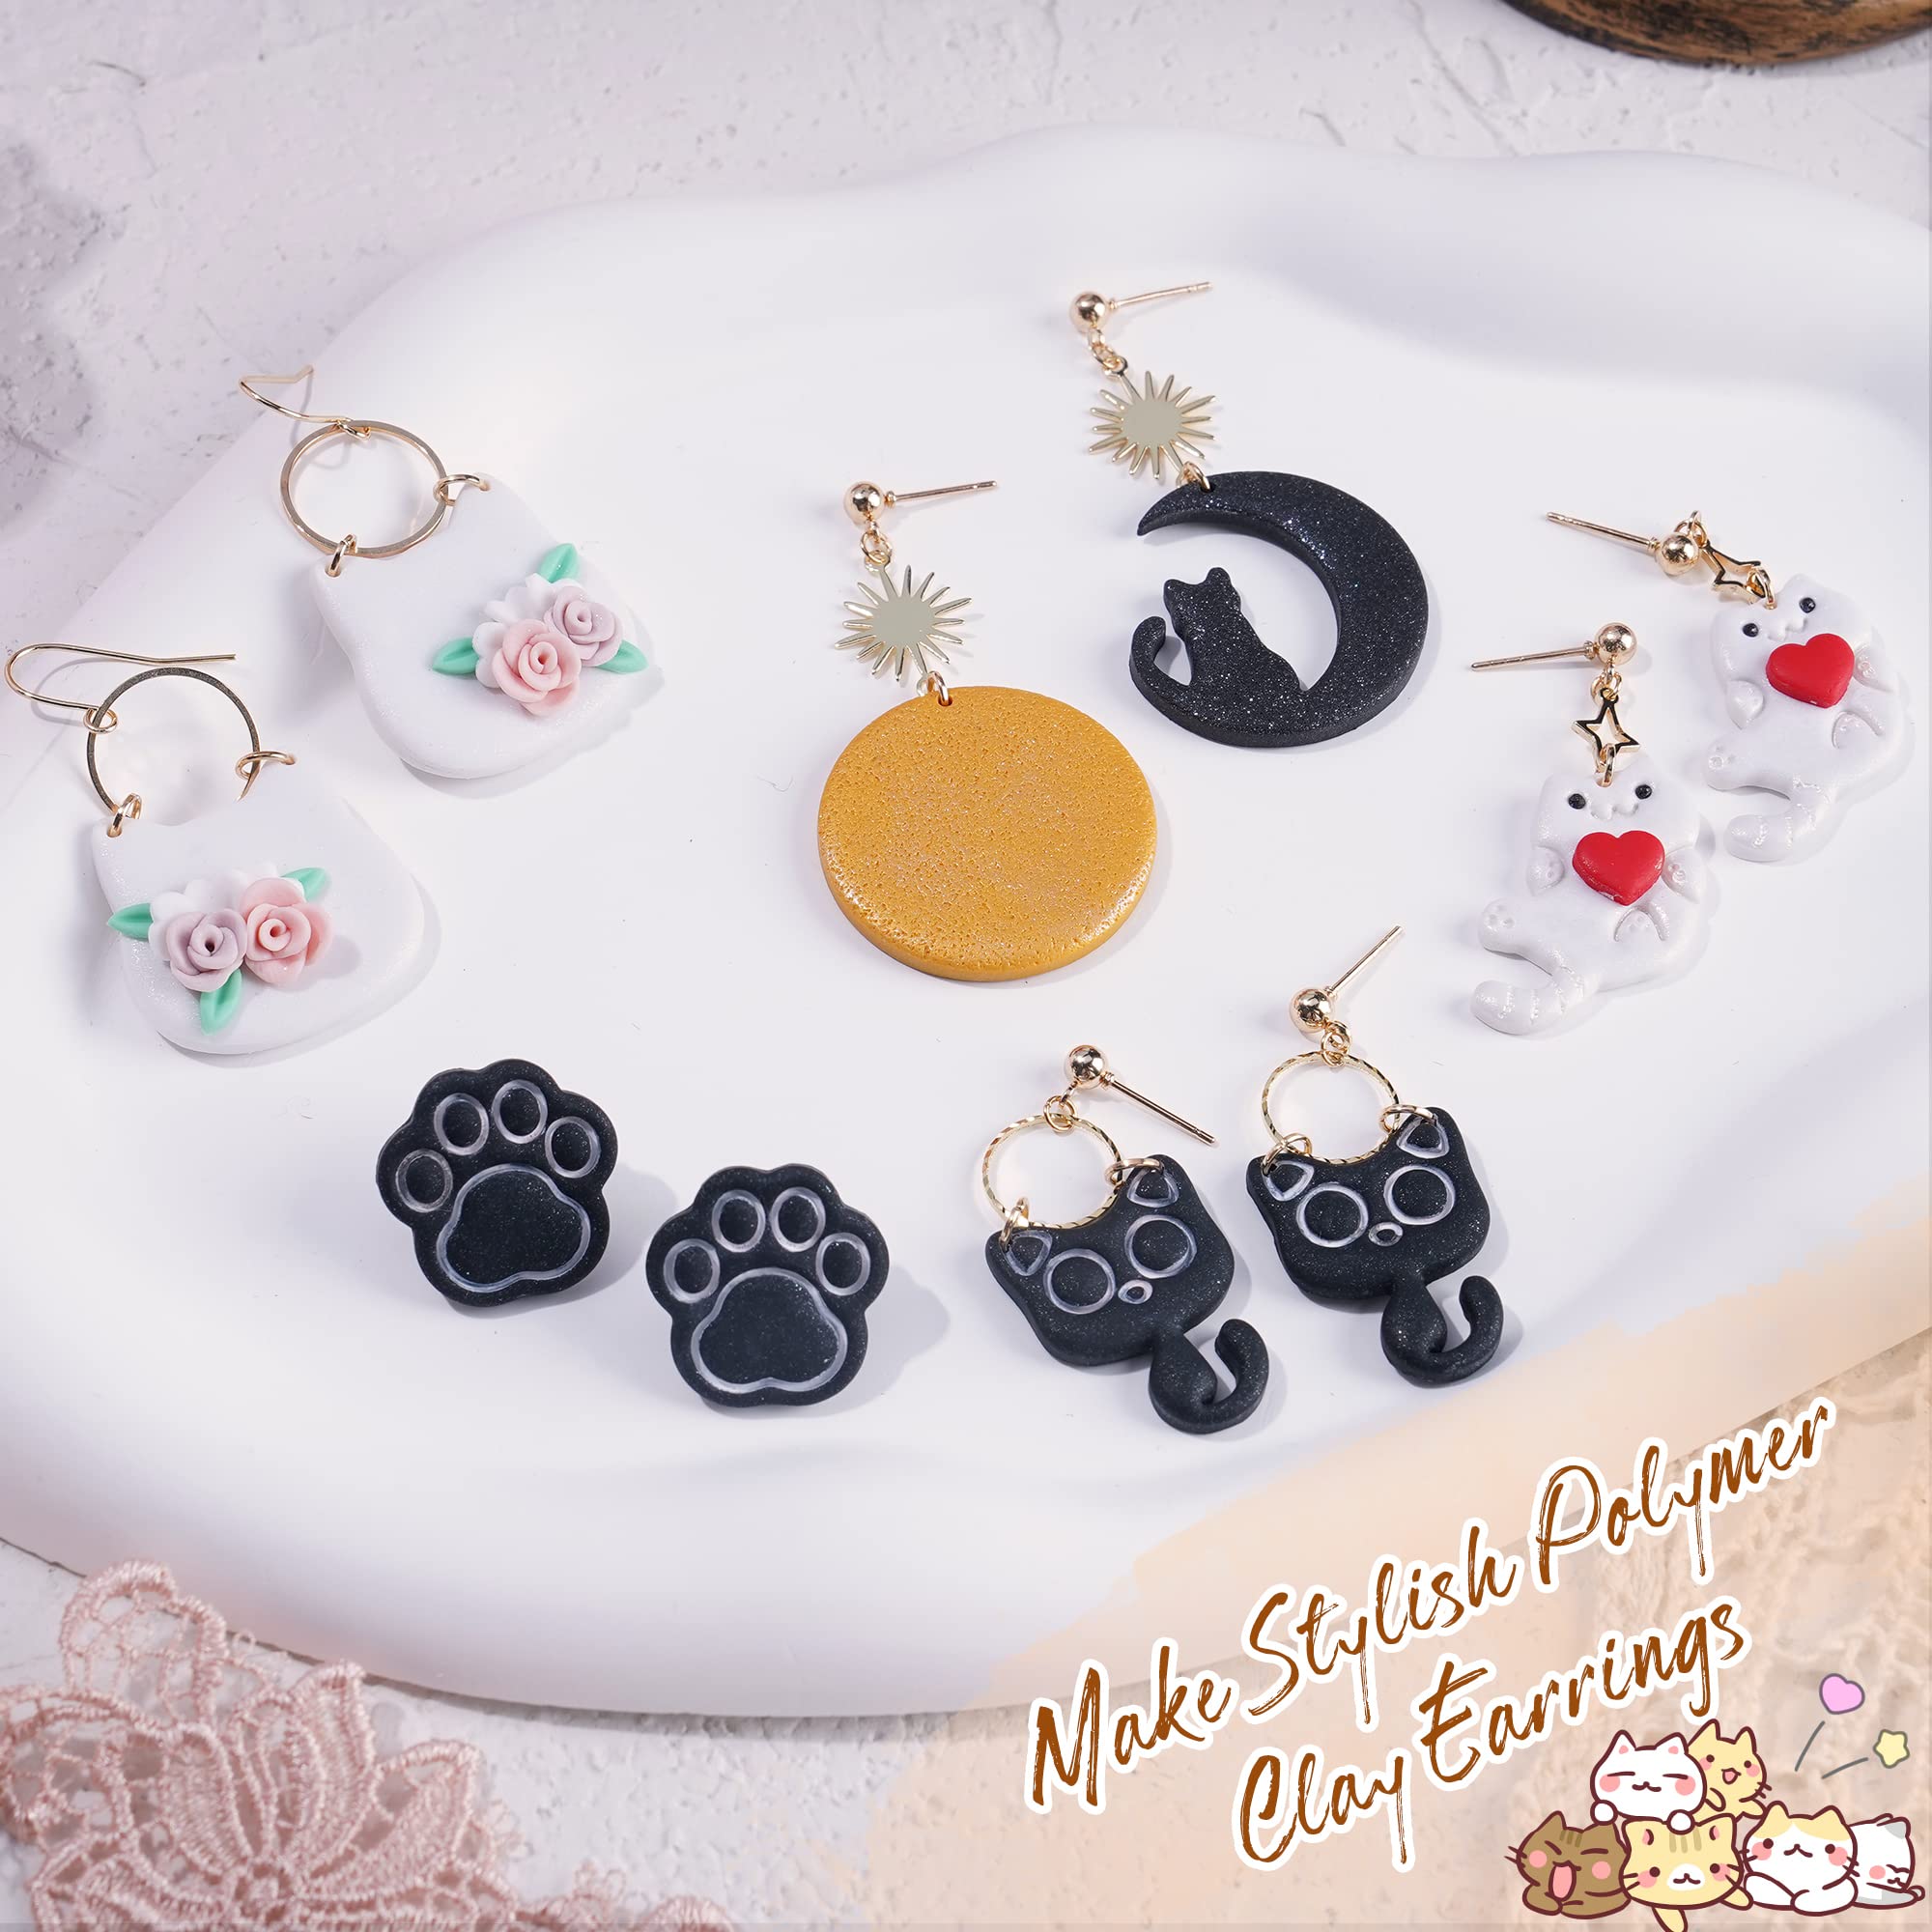 Puocaon Polymer Clay Cutters Sets Cute Kitten Cat